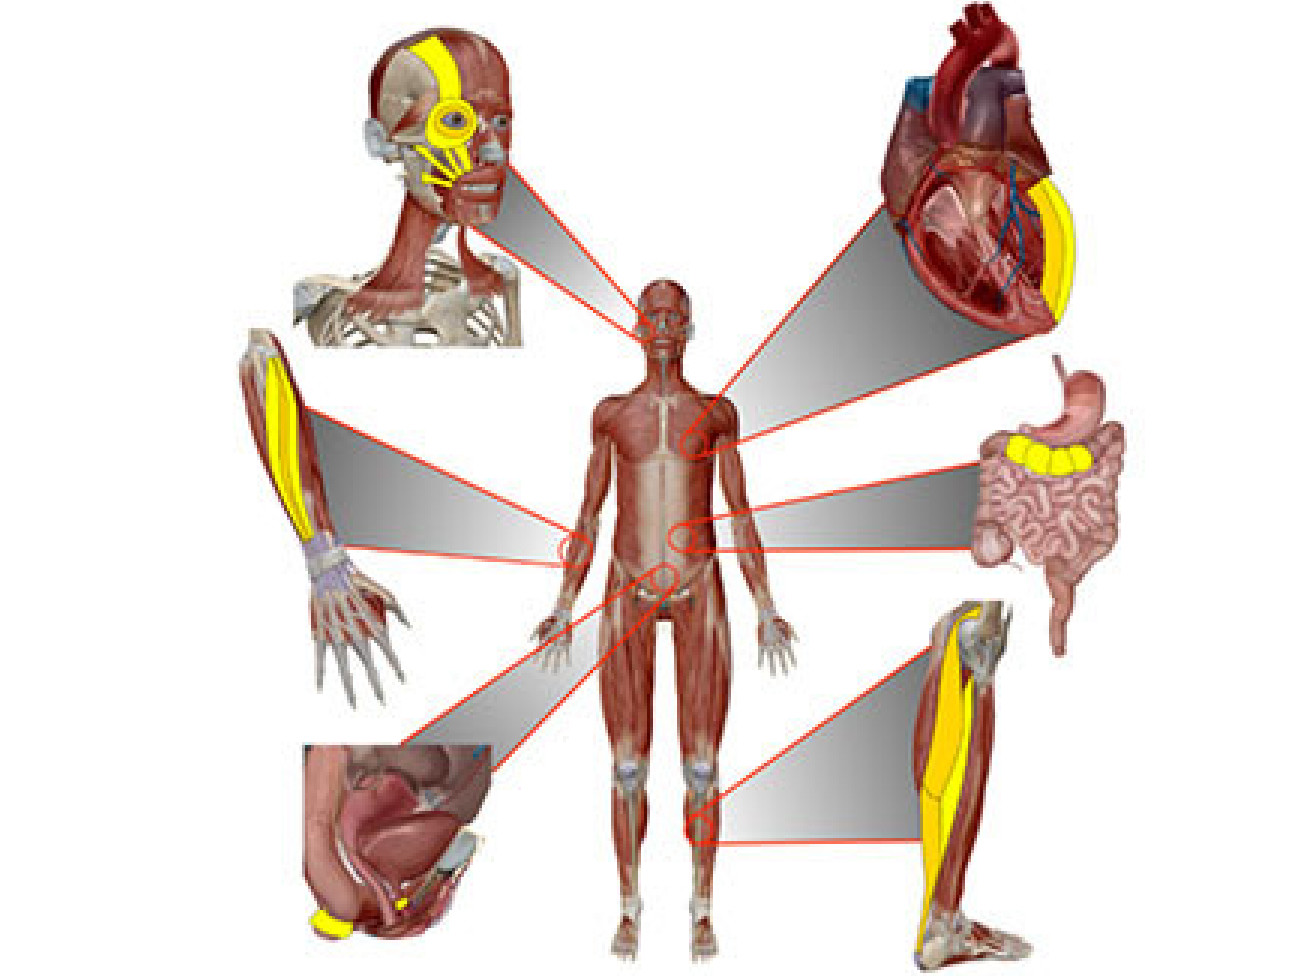 Diagram showing the musculature of different body areas